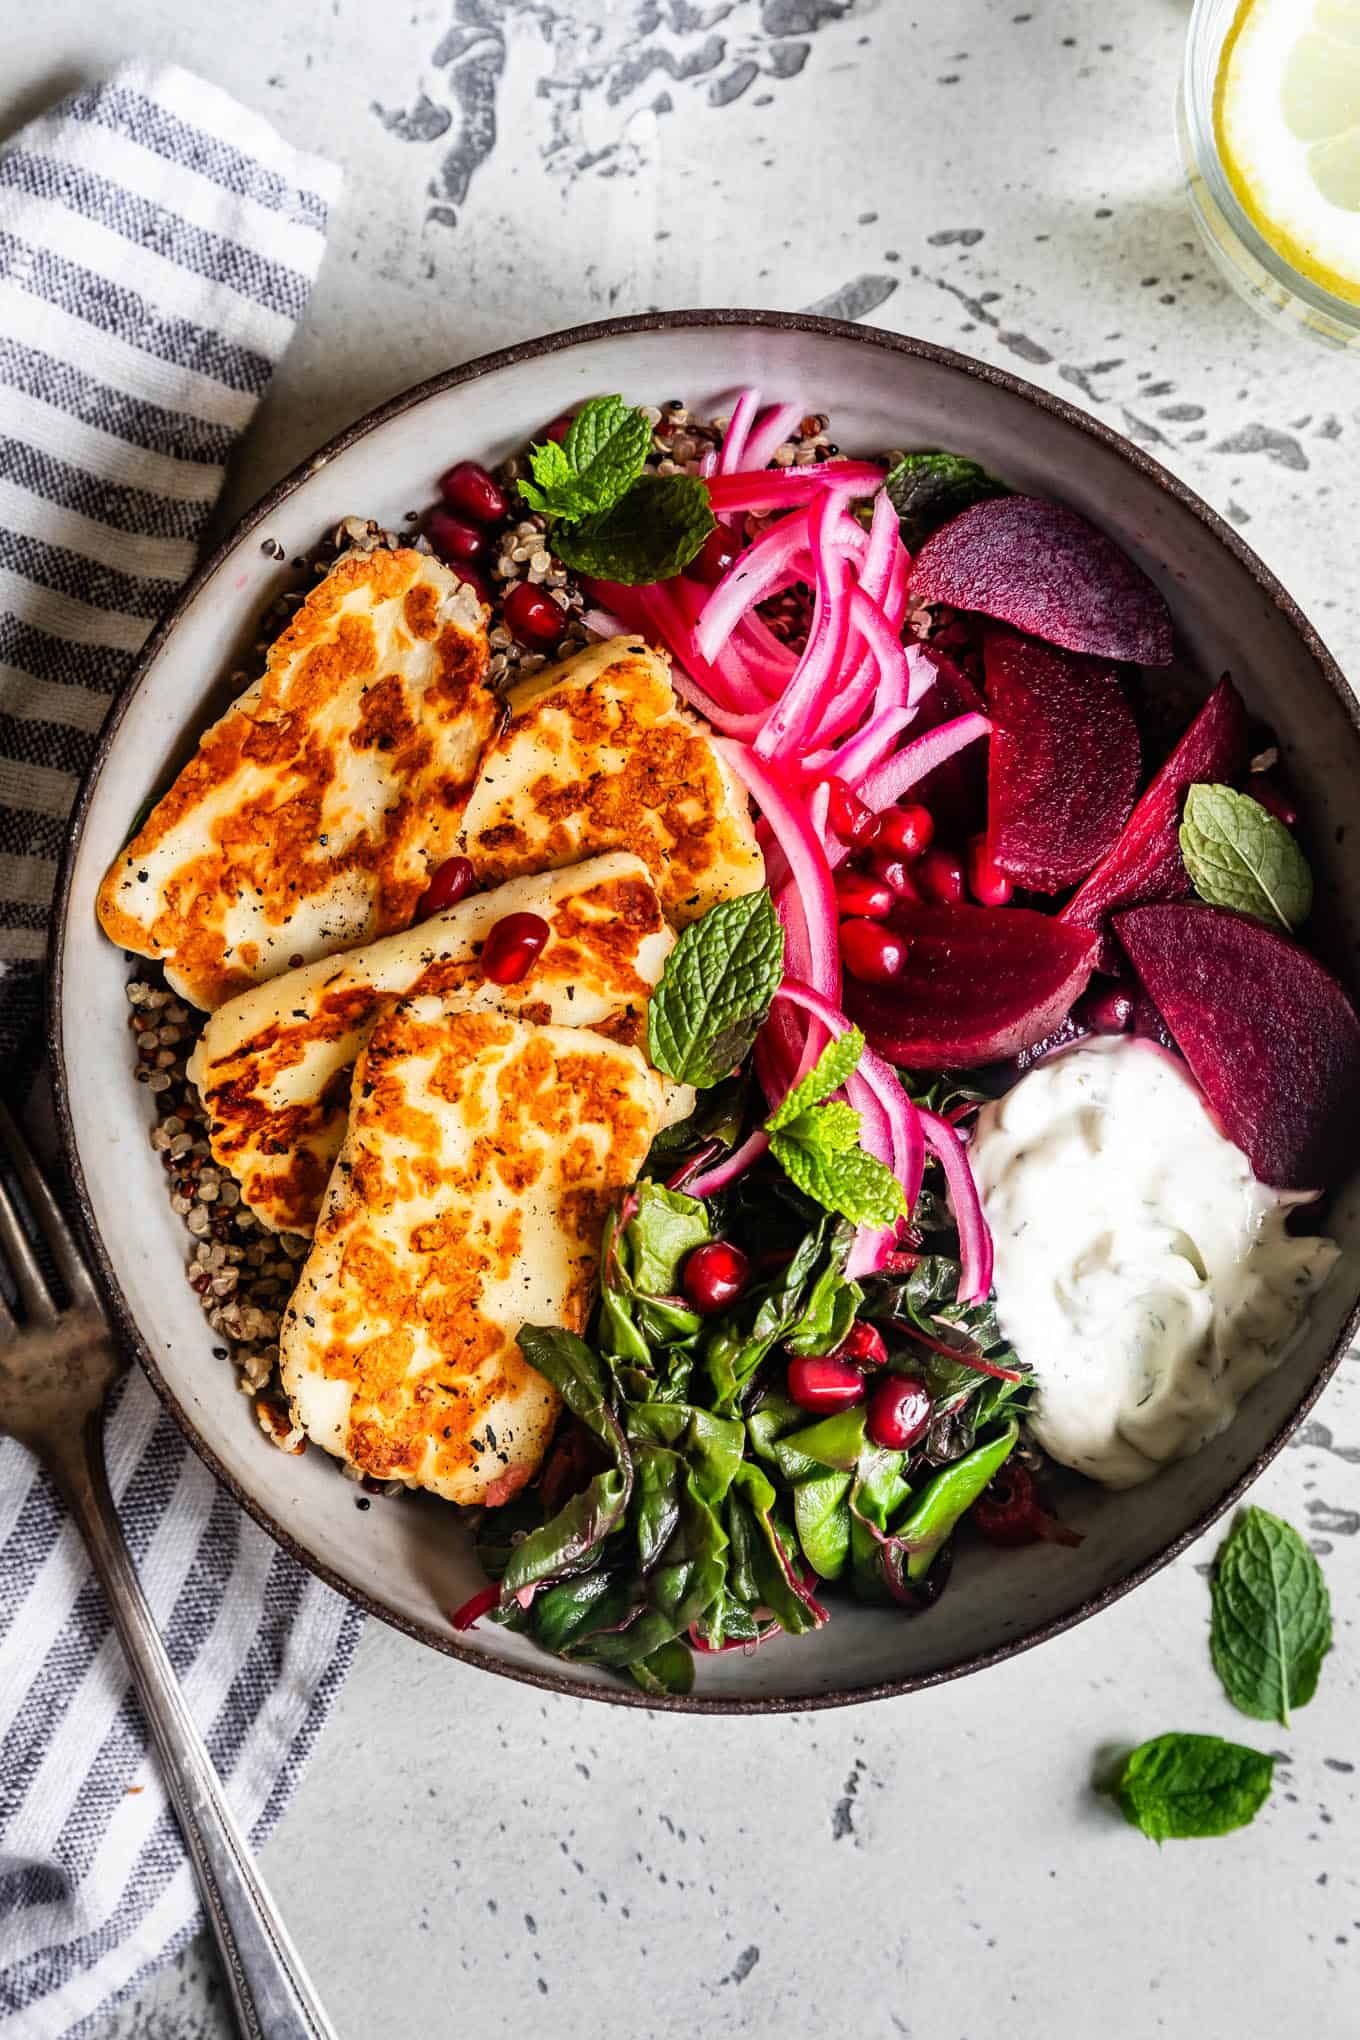 Halloumi Salad with Roasted Beets